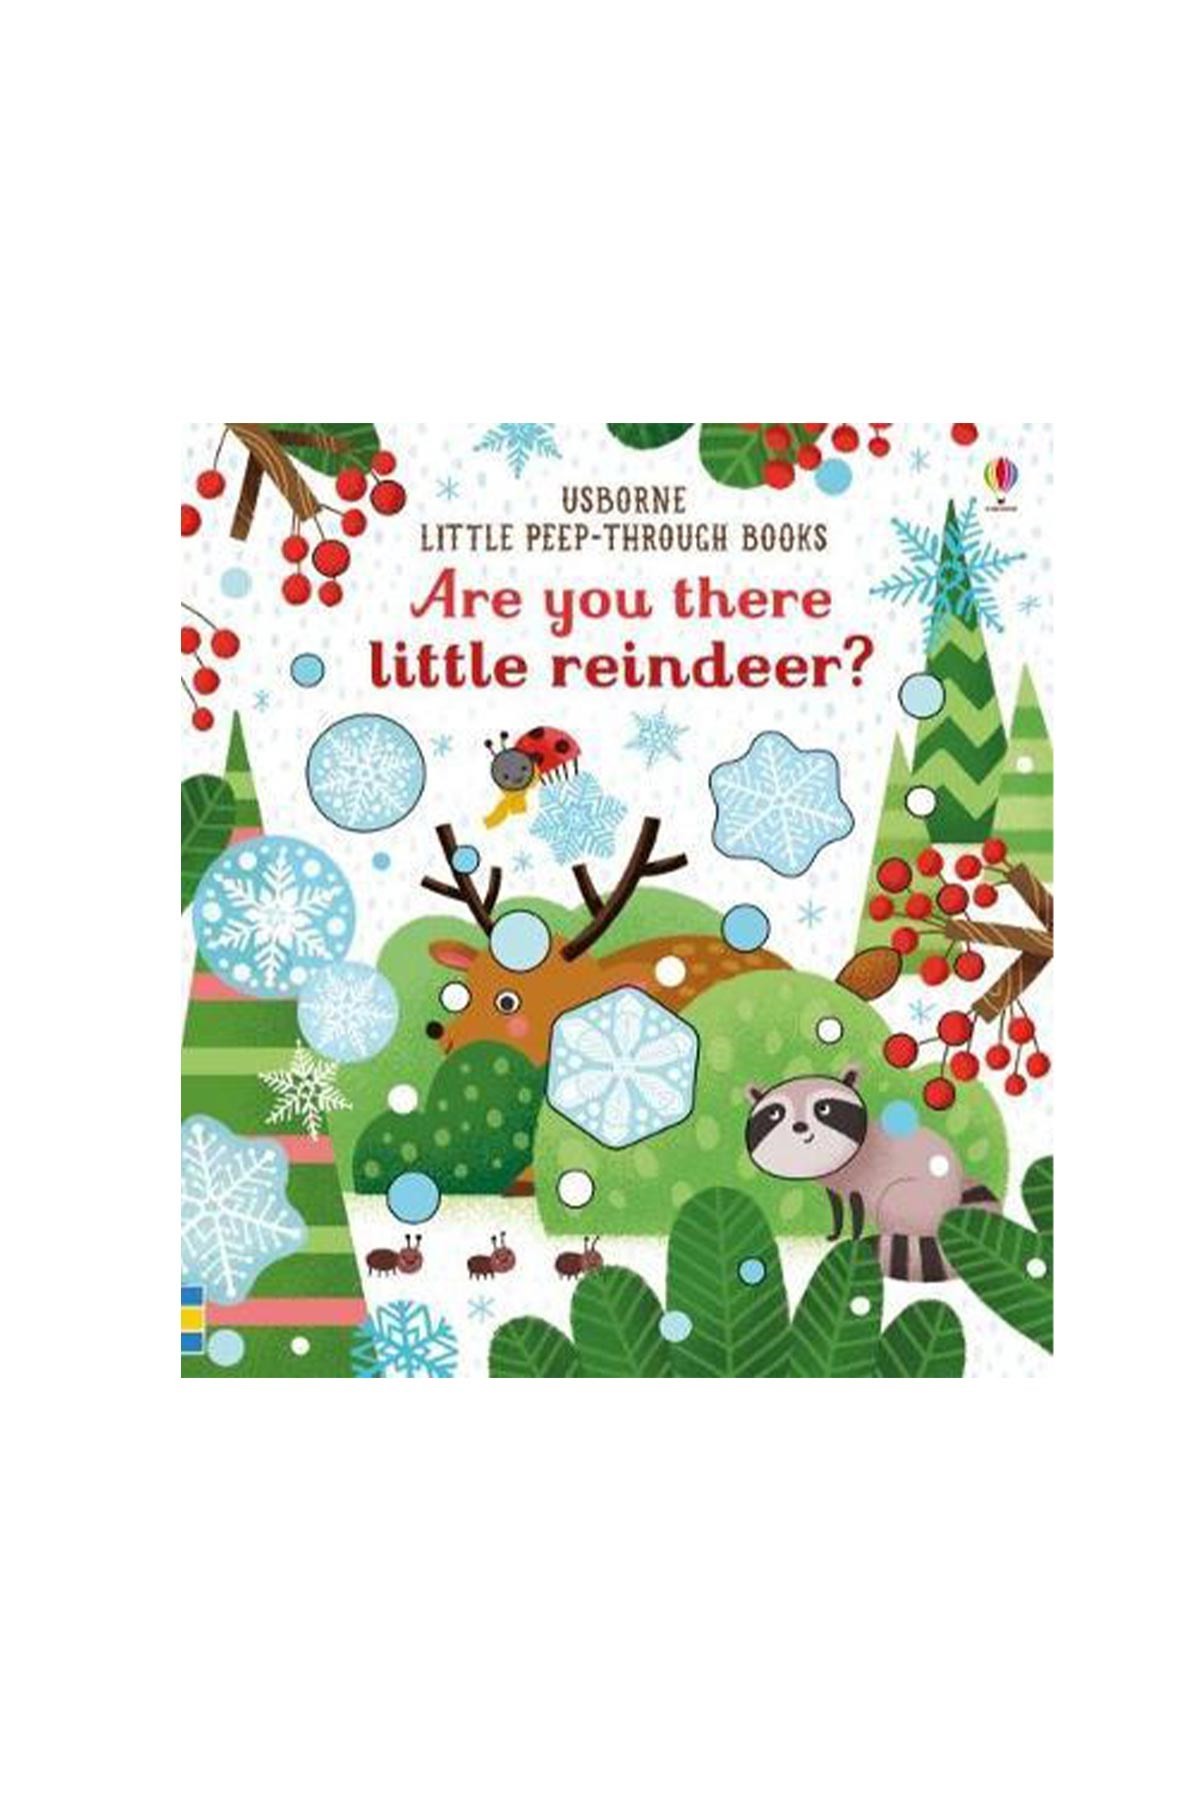 The Usborne Are You There Little Reindeer?